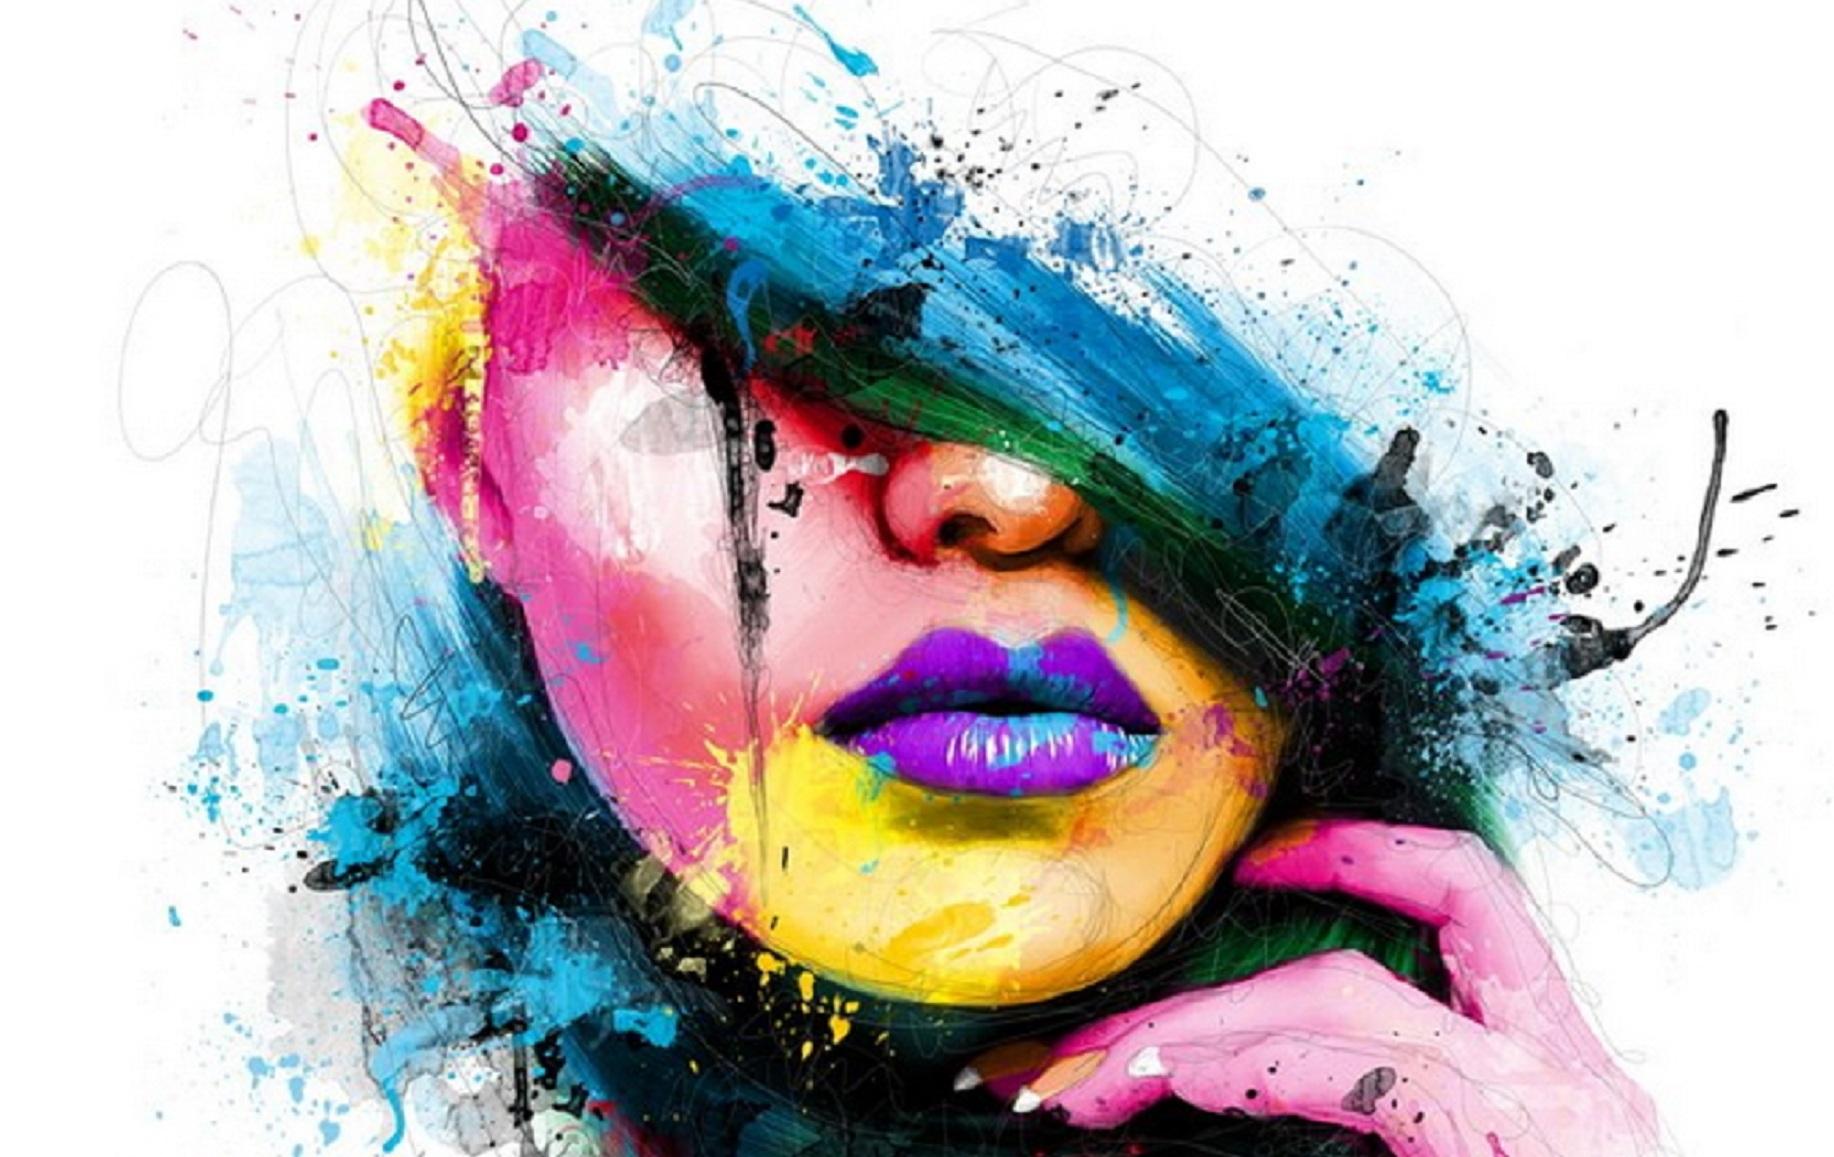 Abstract Art Faces Wallpaper 2014 | I HD Images